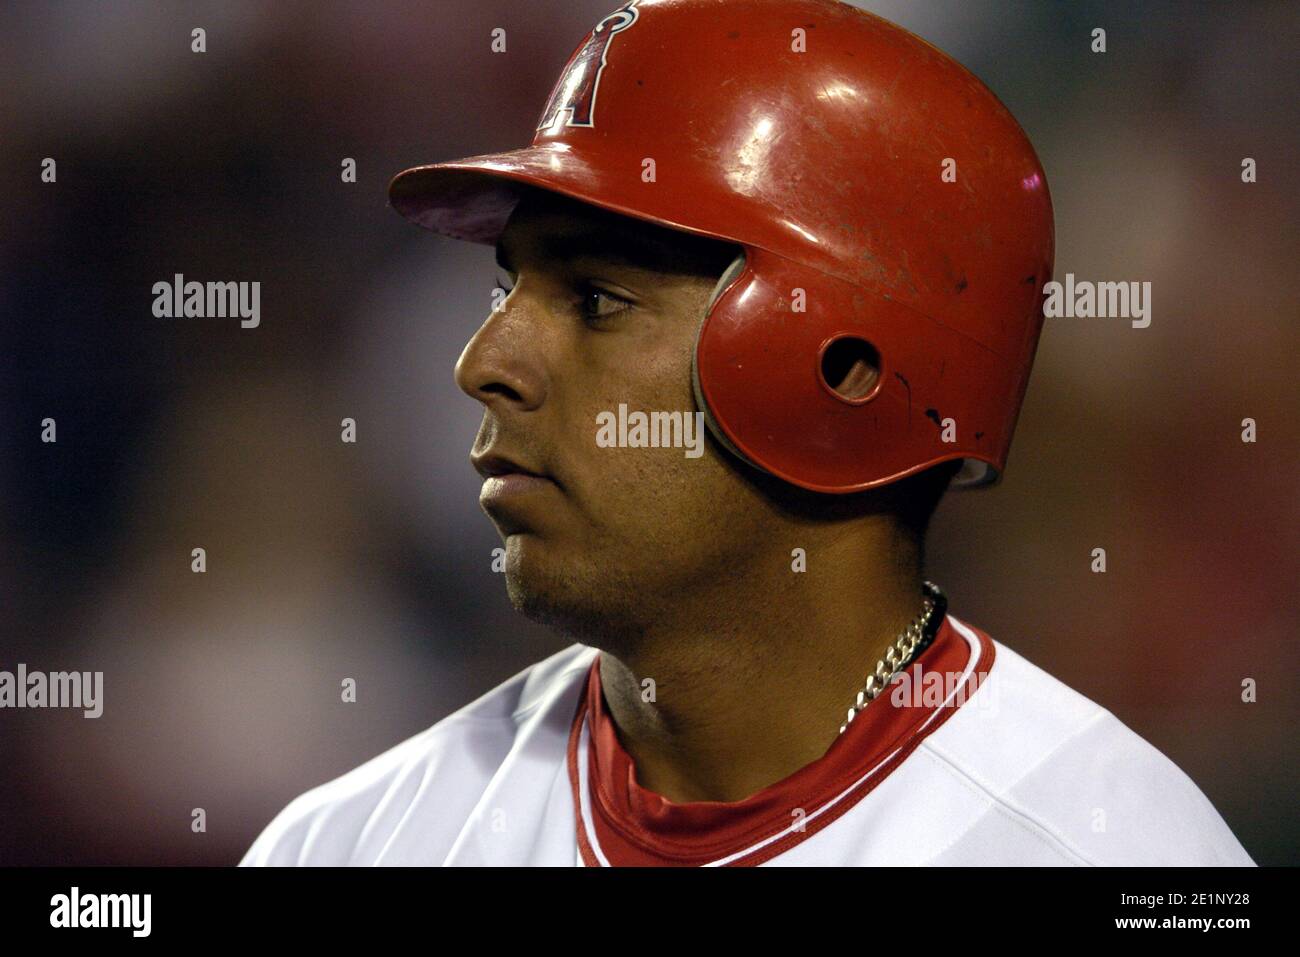 Juan Rivera of the Angels during 8-3 victory over the Los Angeles Dodgers at Angel Stadium in Anaheim, Calif. on Friday, April 1, 2005. Stock Photo